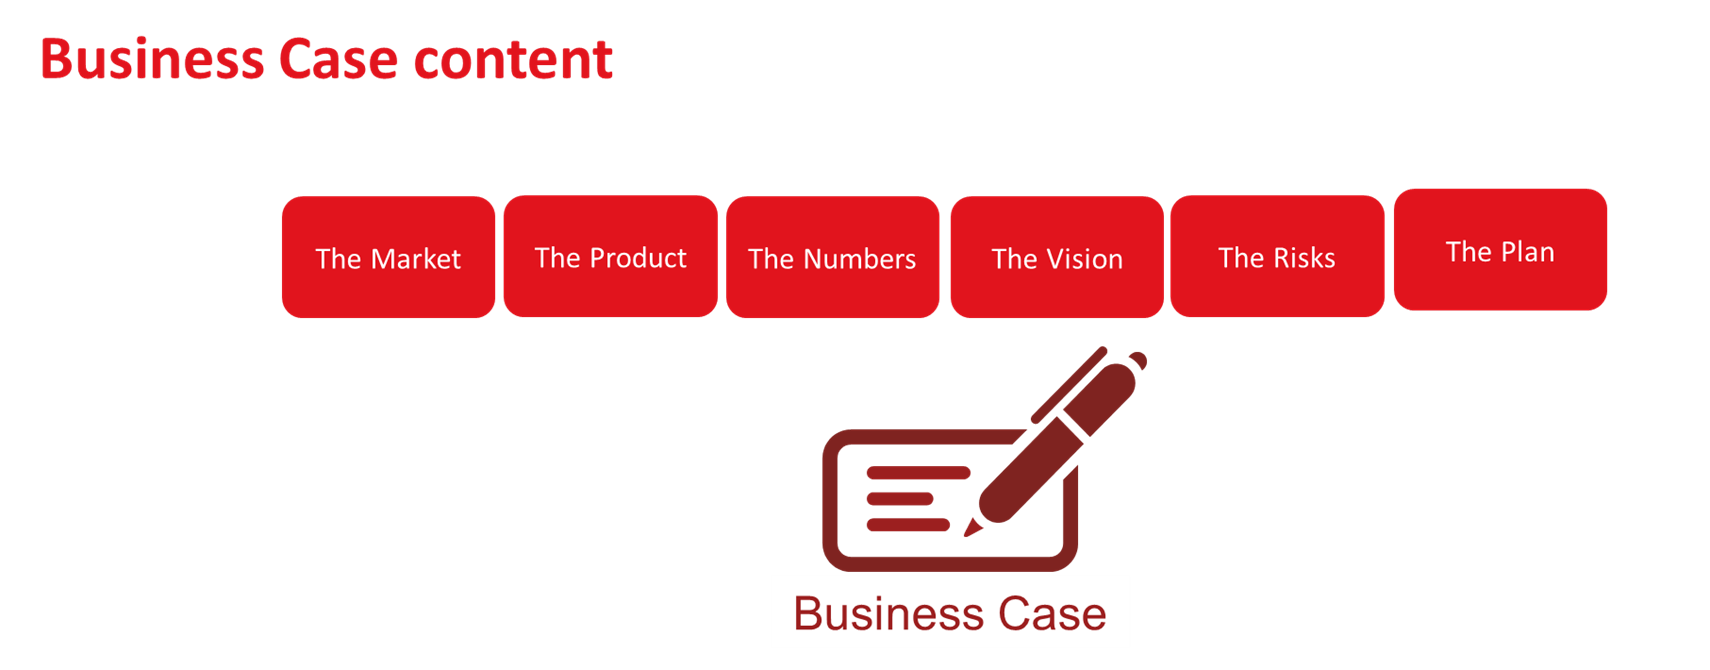 Your business case